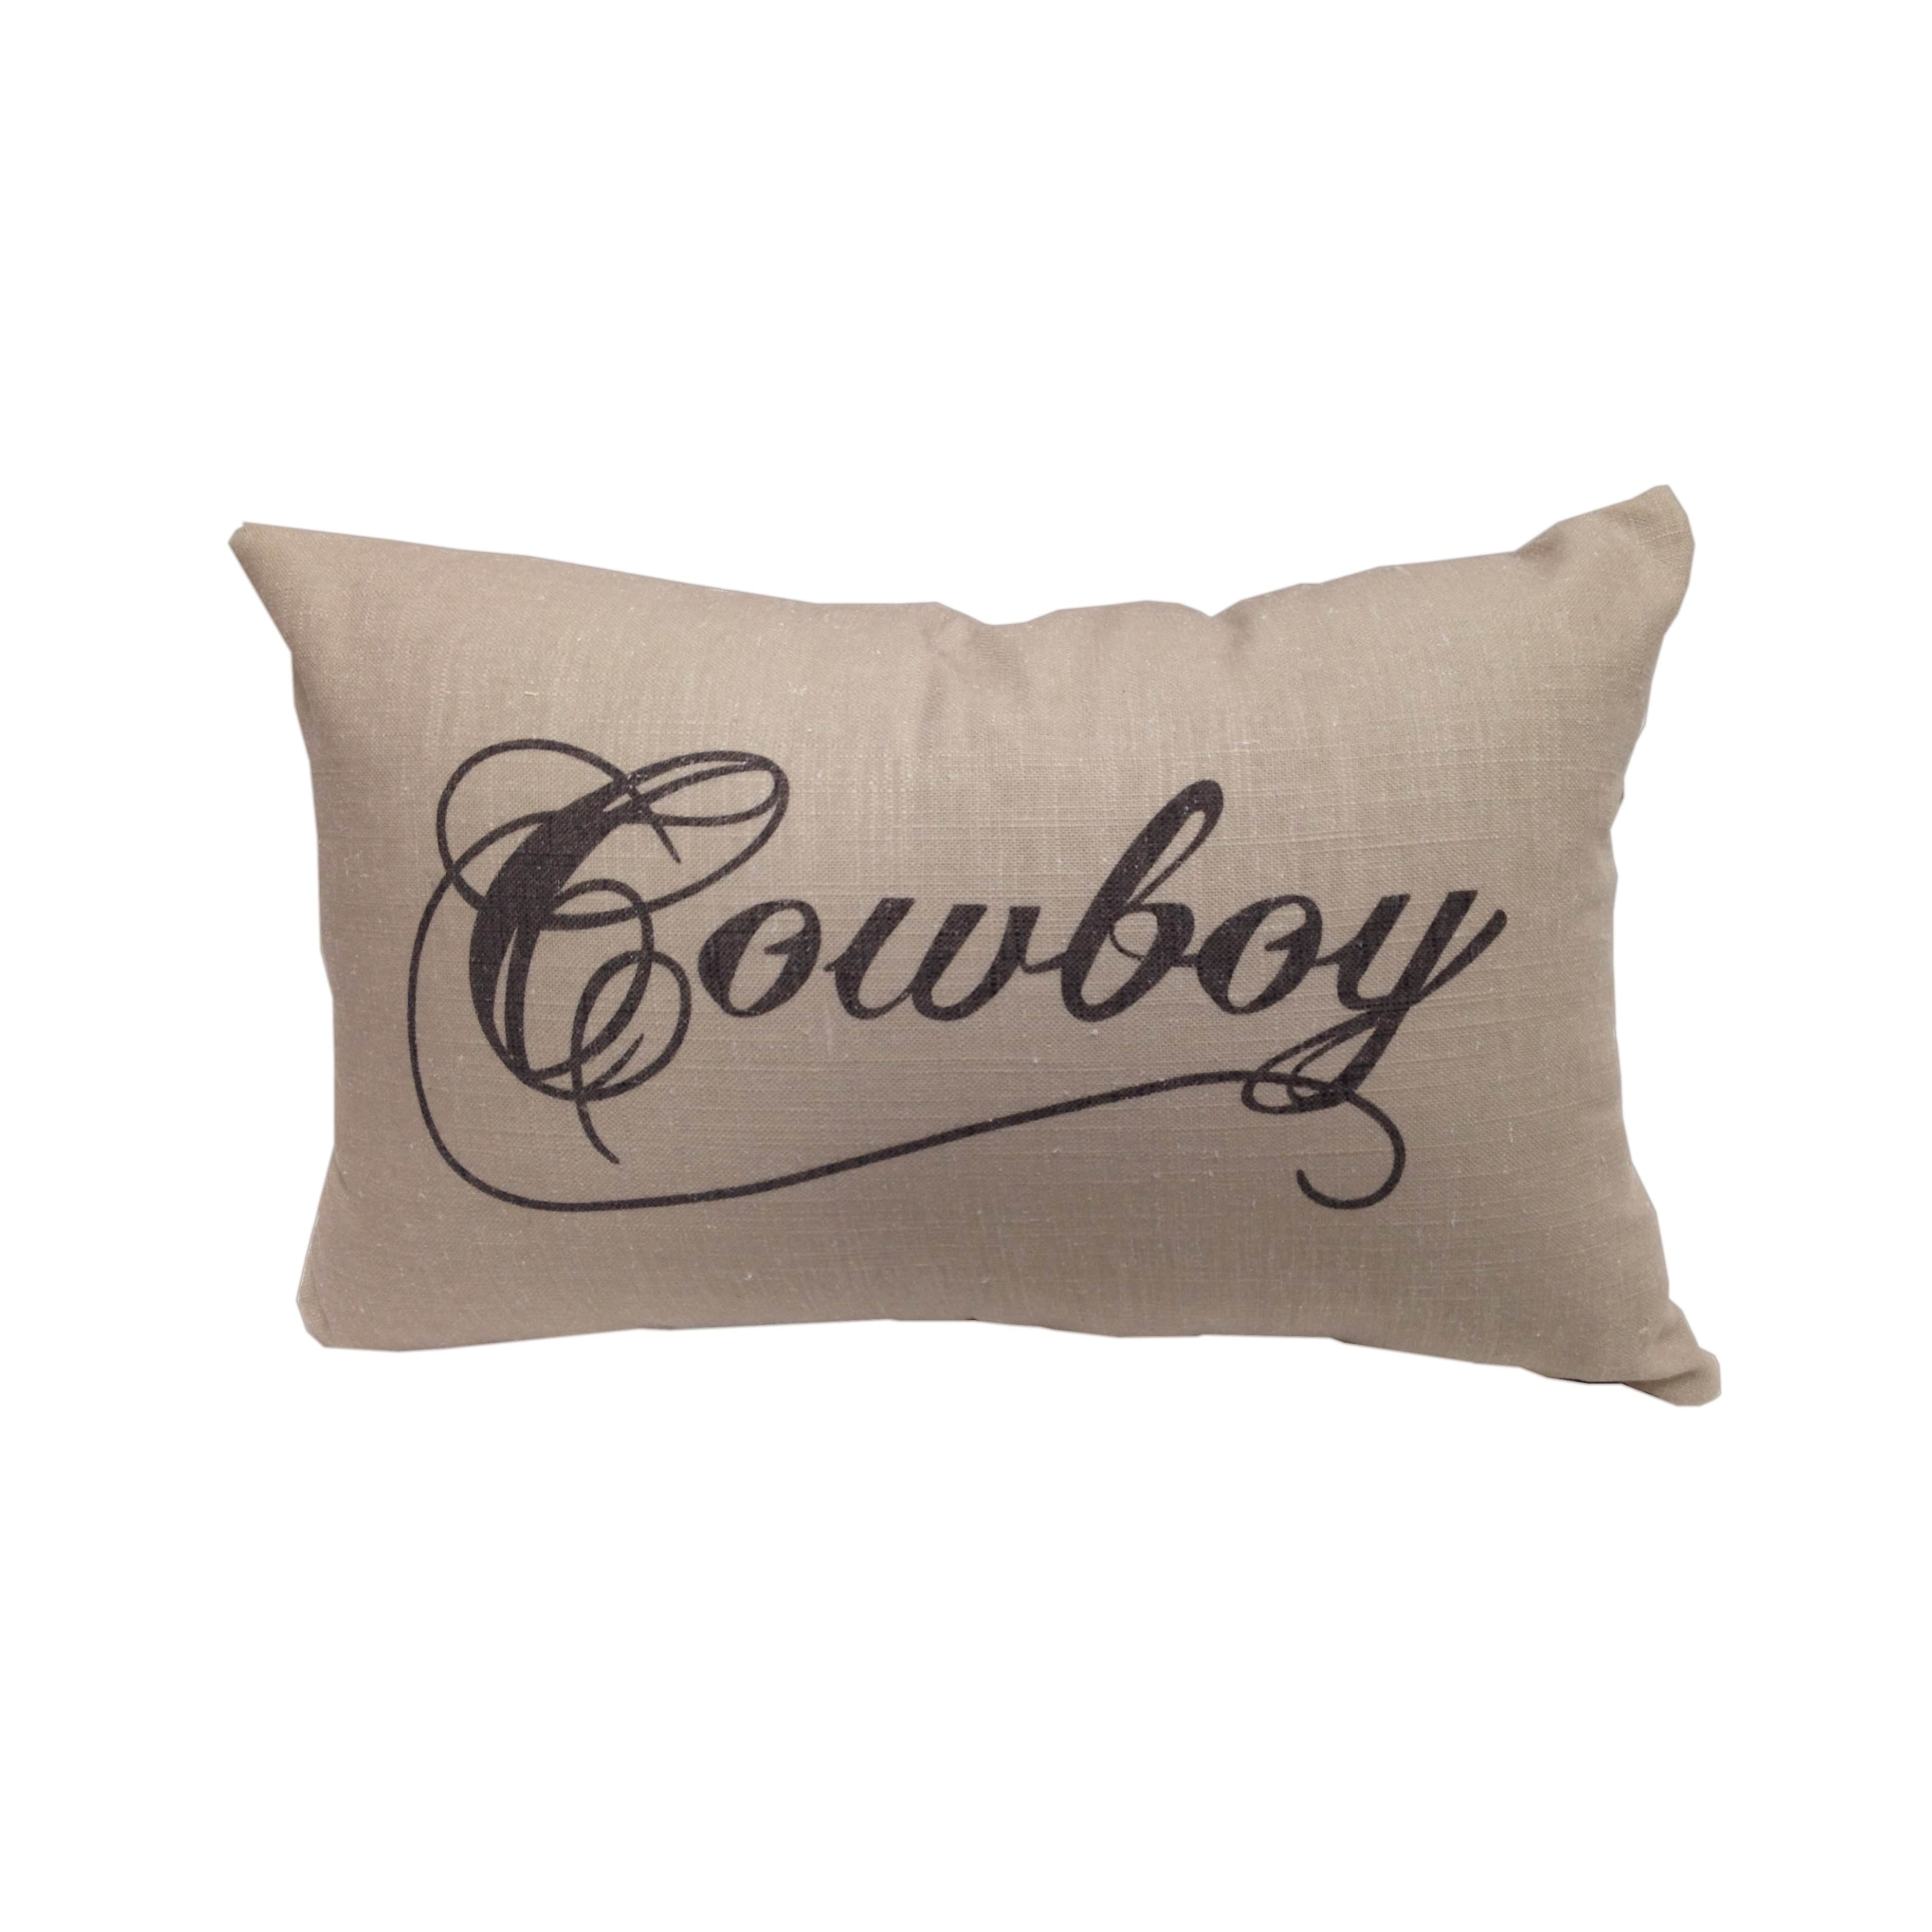 Western Cowhide Print Throw Pillow Southwestern Lumbar Pillow Western Boho Accent  Pillow Western Home Decor Cowgirl Style Pillow 